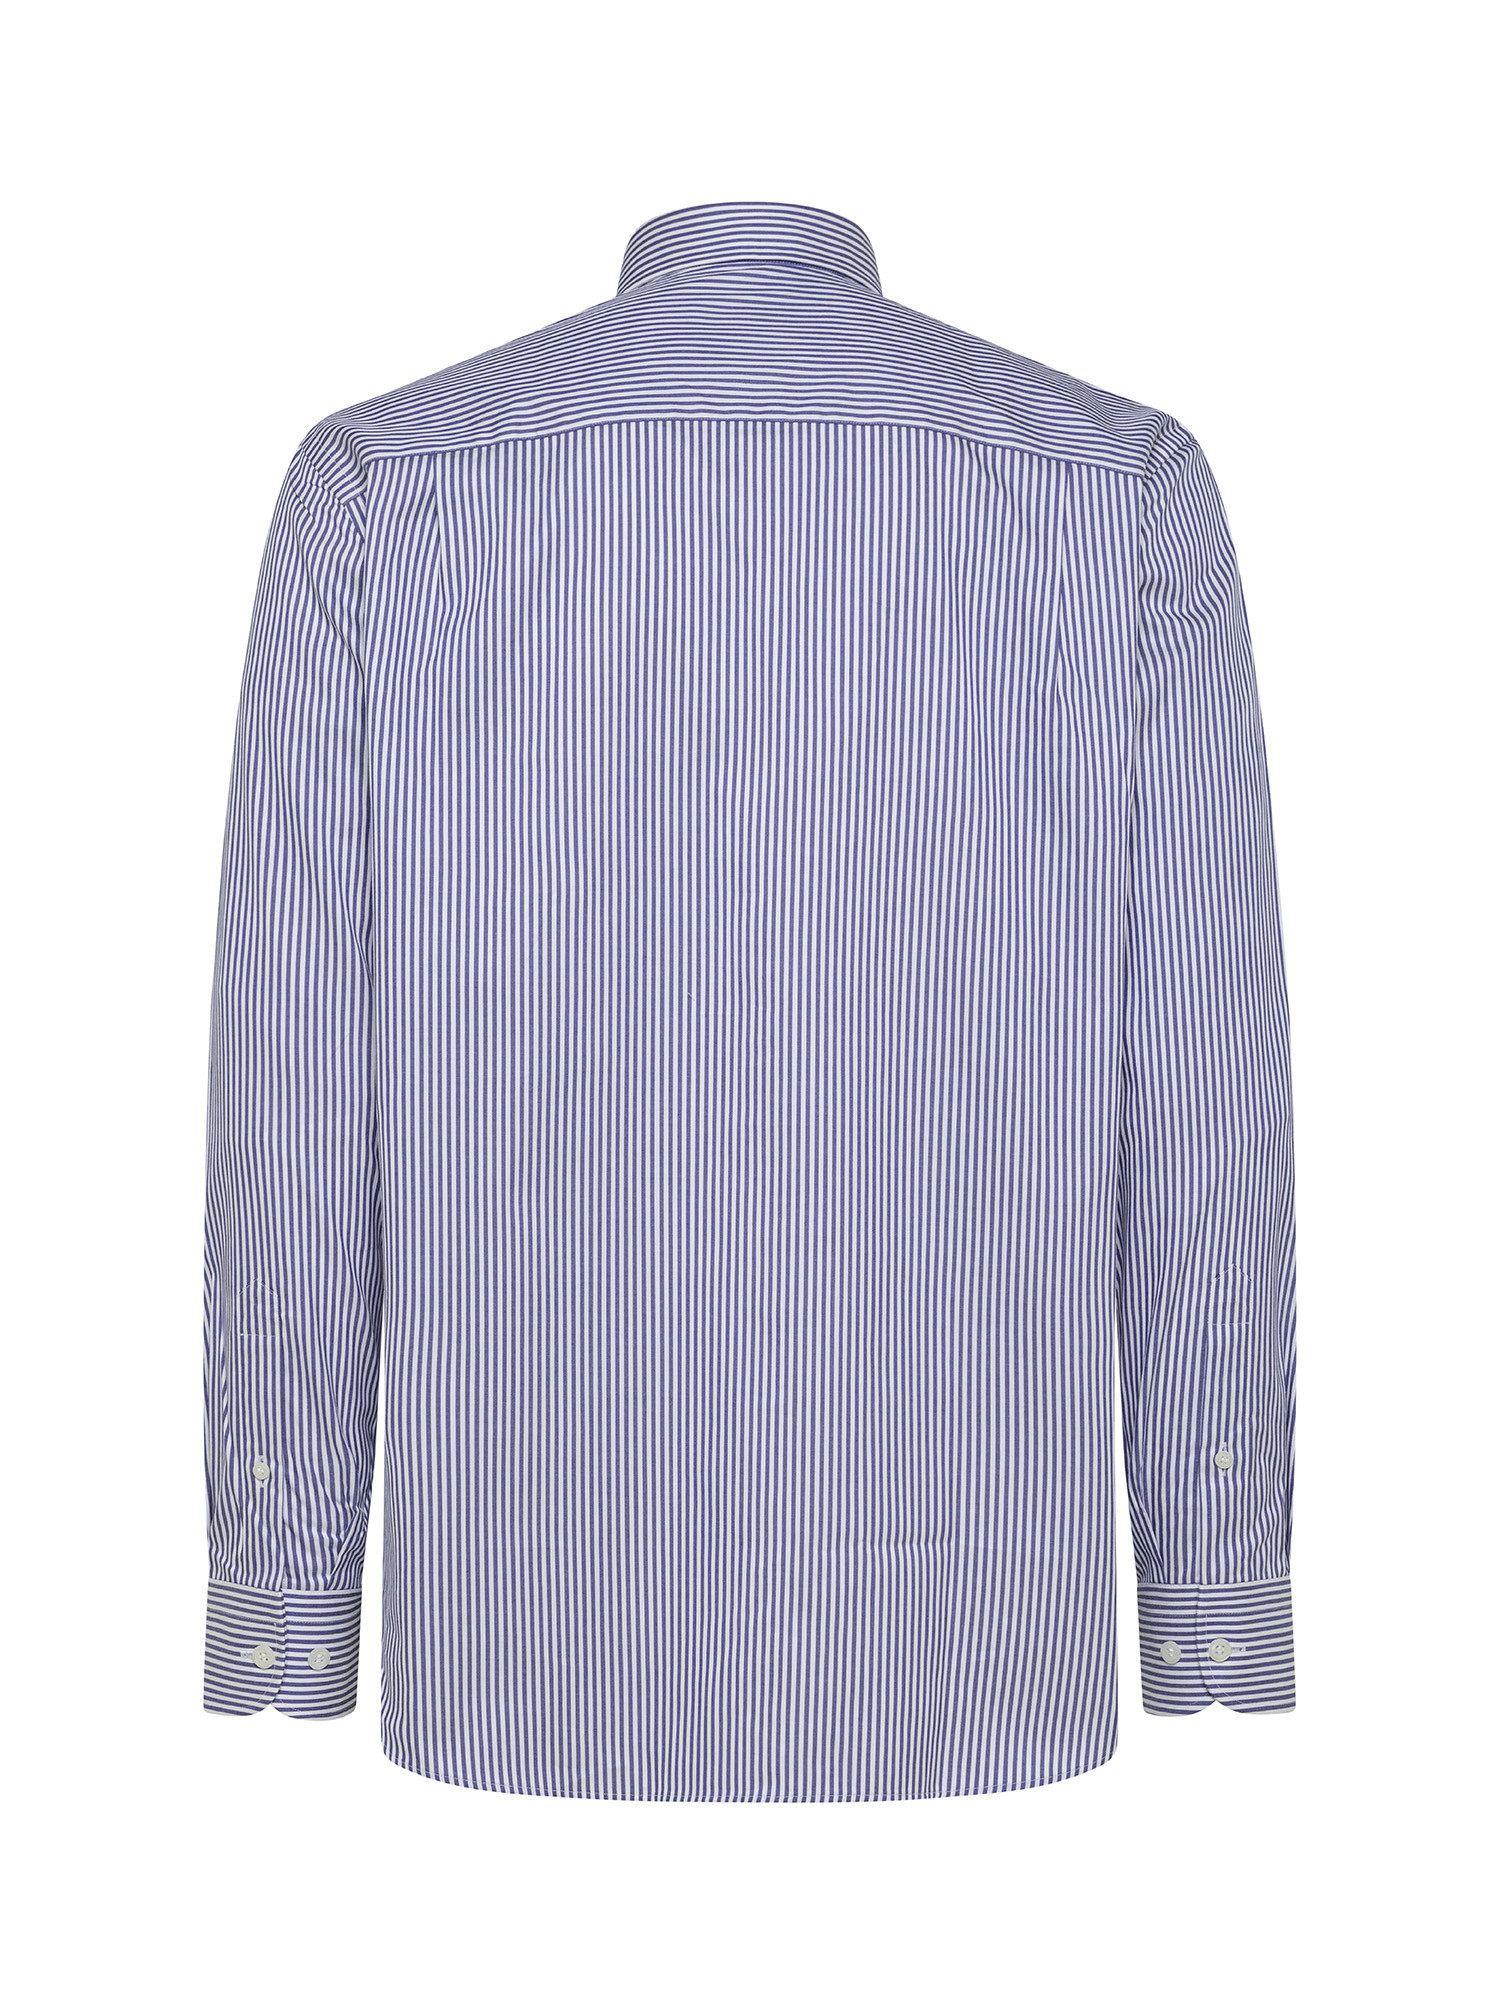 Regular fit shirt in pure cotton, Blue, large image number 2